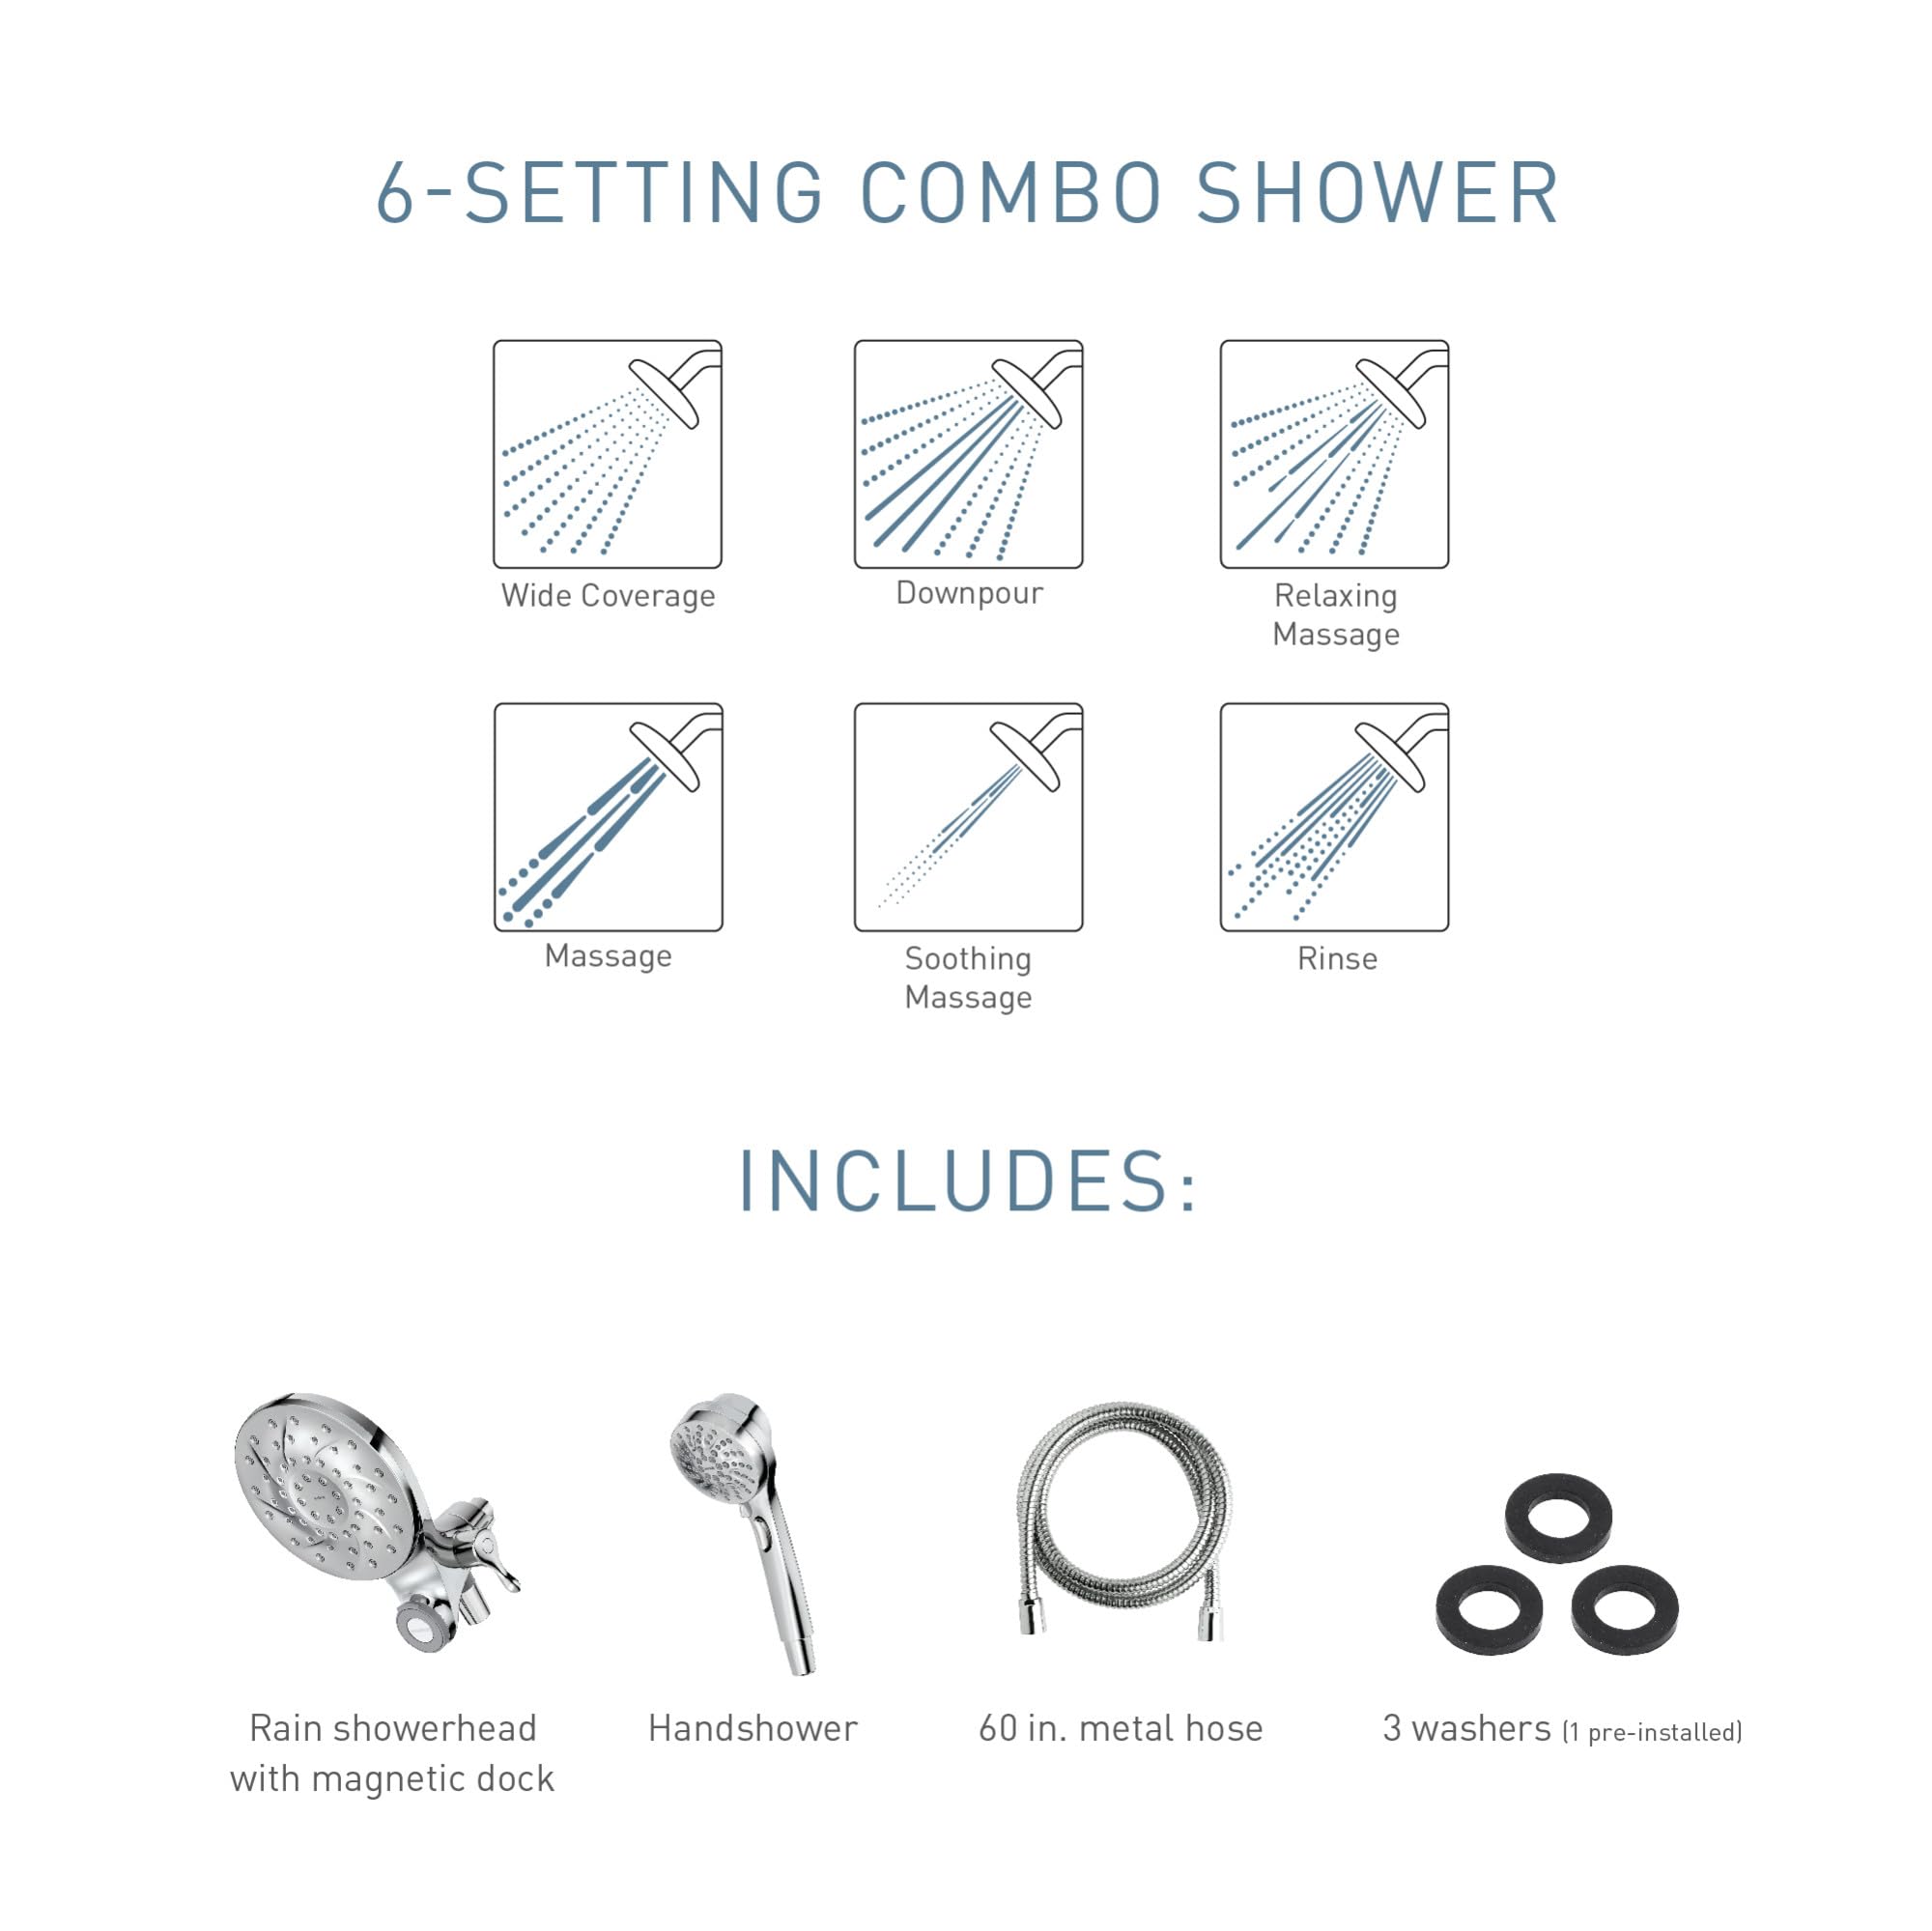 Moen Engage Magnetix Spot Resist Brushed Nickel Multi-Function Handshower and Rainshower Combo Featuring Magnetic Docking System, Shower Head with Handheld Spray, 26009SRN